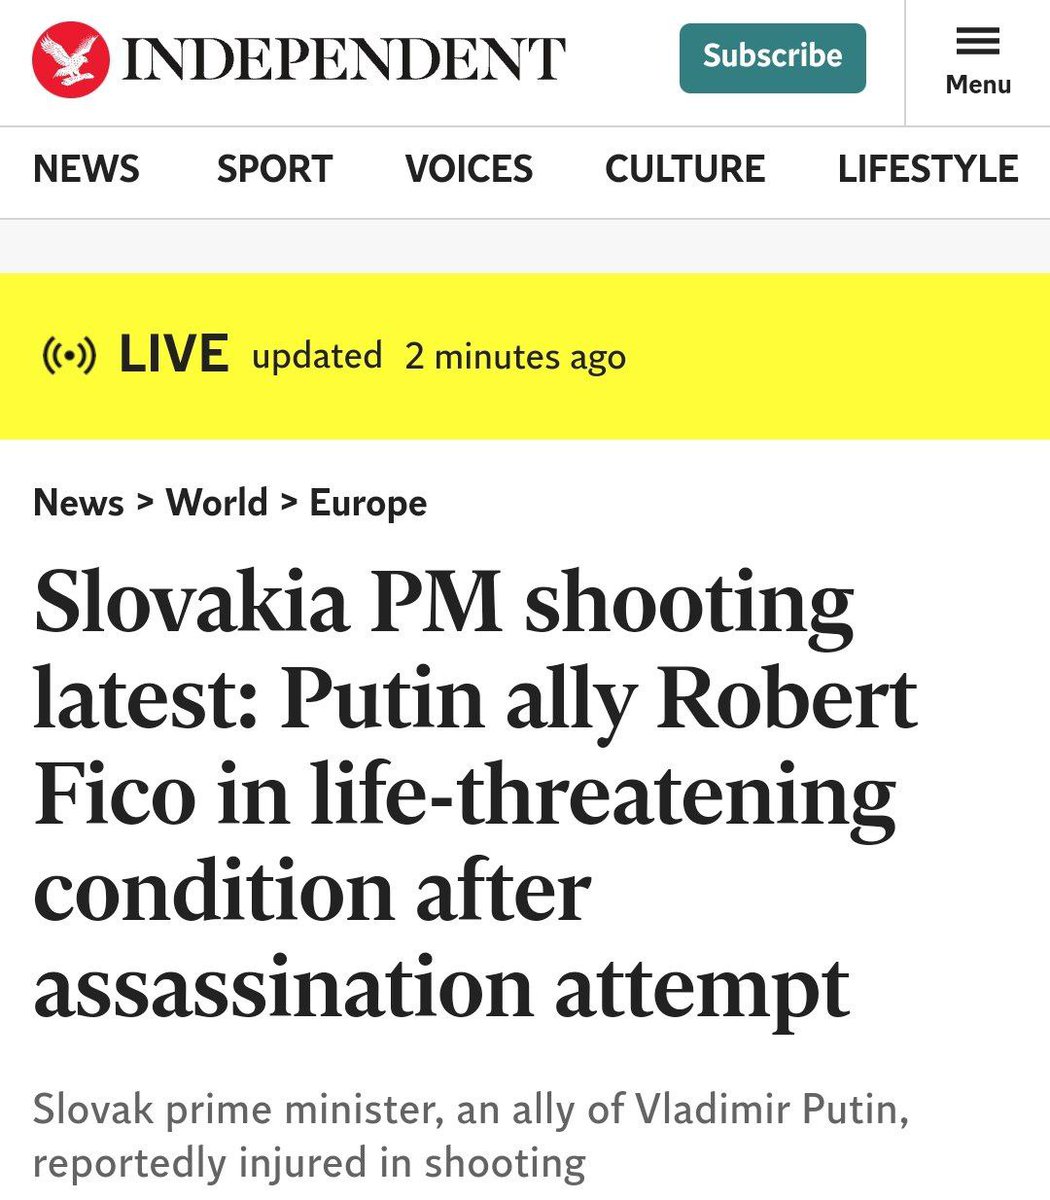 Slovakian Prime Minister Robert Fico has been shot in an assassination attempt. - The Independent refers to him disparagingly as 'Putin ally'. Why? He failed to support the proxy war.